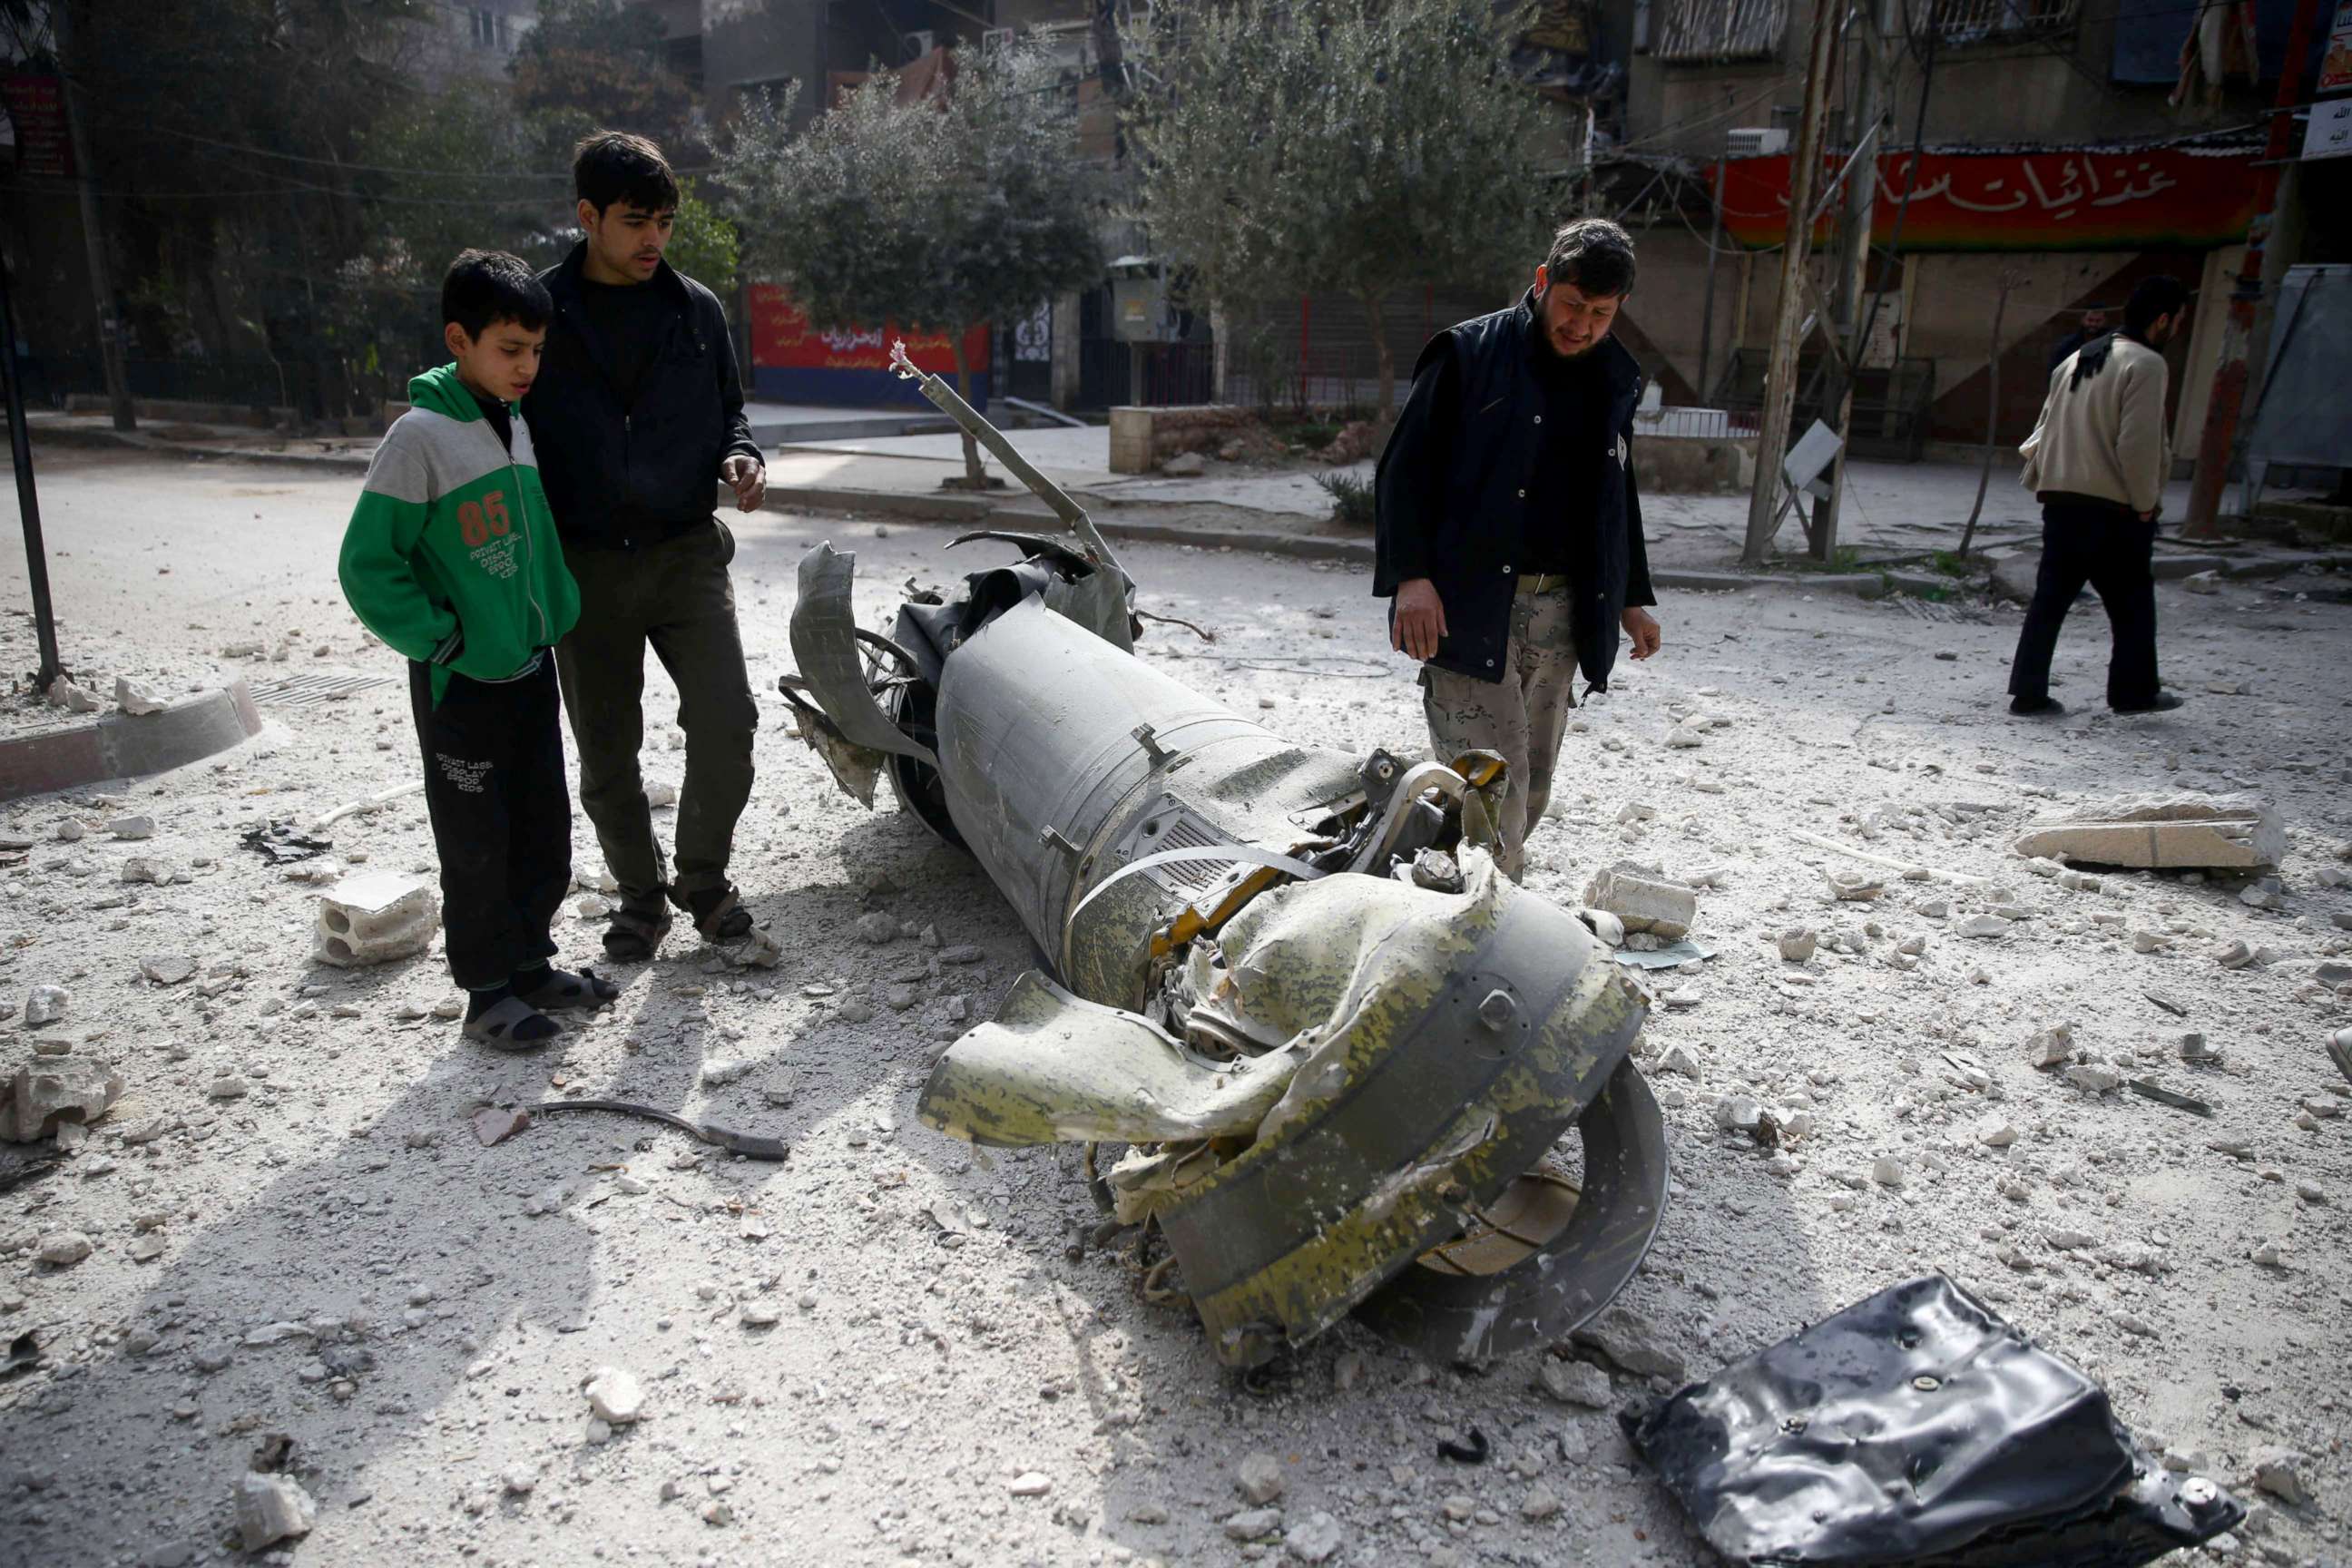 PHOTO: People inspect missile remains in the besieged town of Douma, in eastern Ghouta, Syria, Feb. 23, 2018.